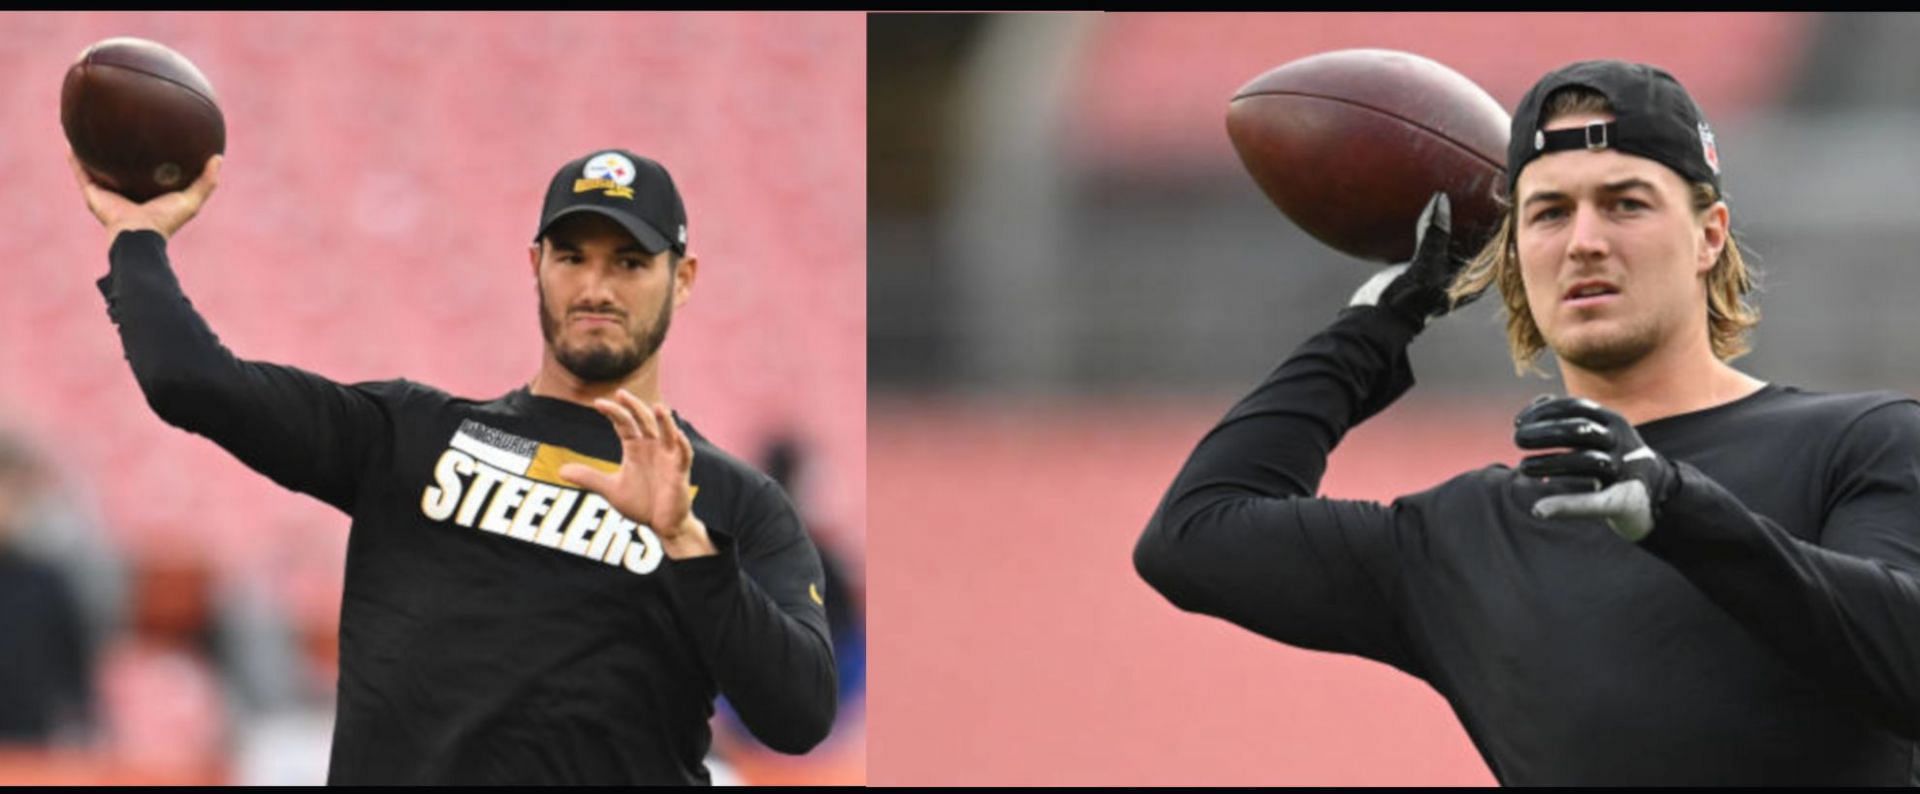 Pittsburgh Steelers fans are hoping for a change at the QB position in 2022